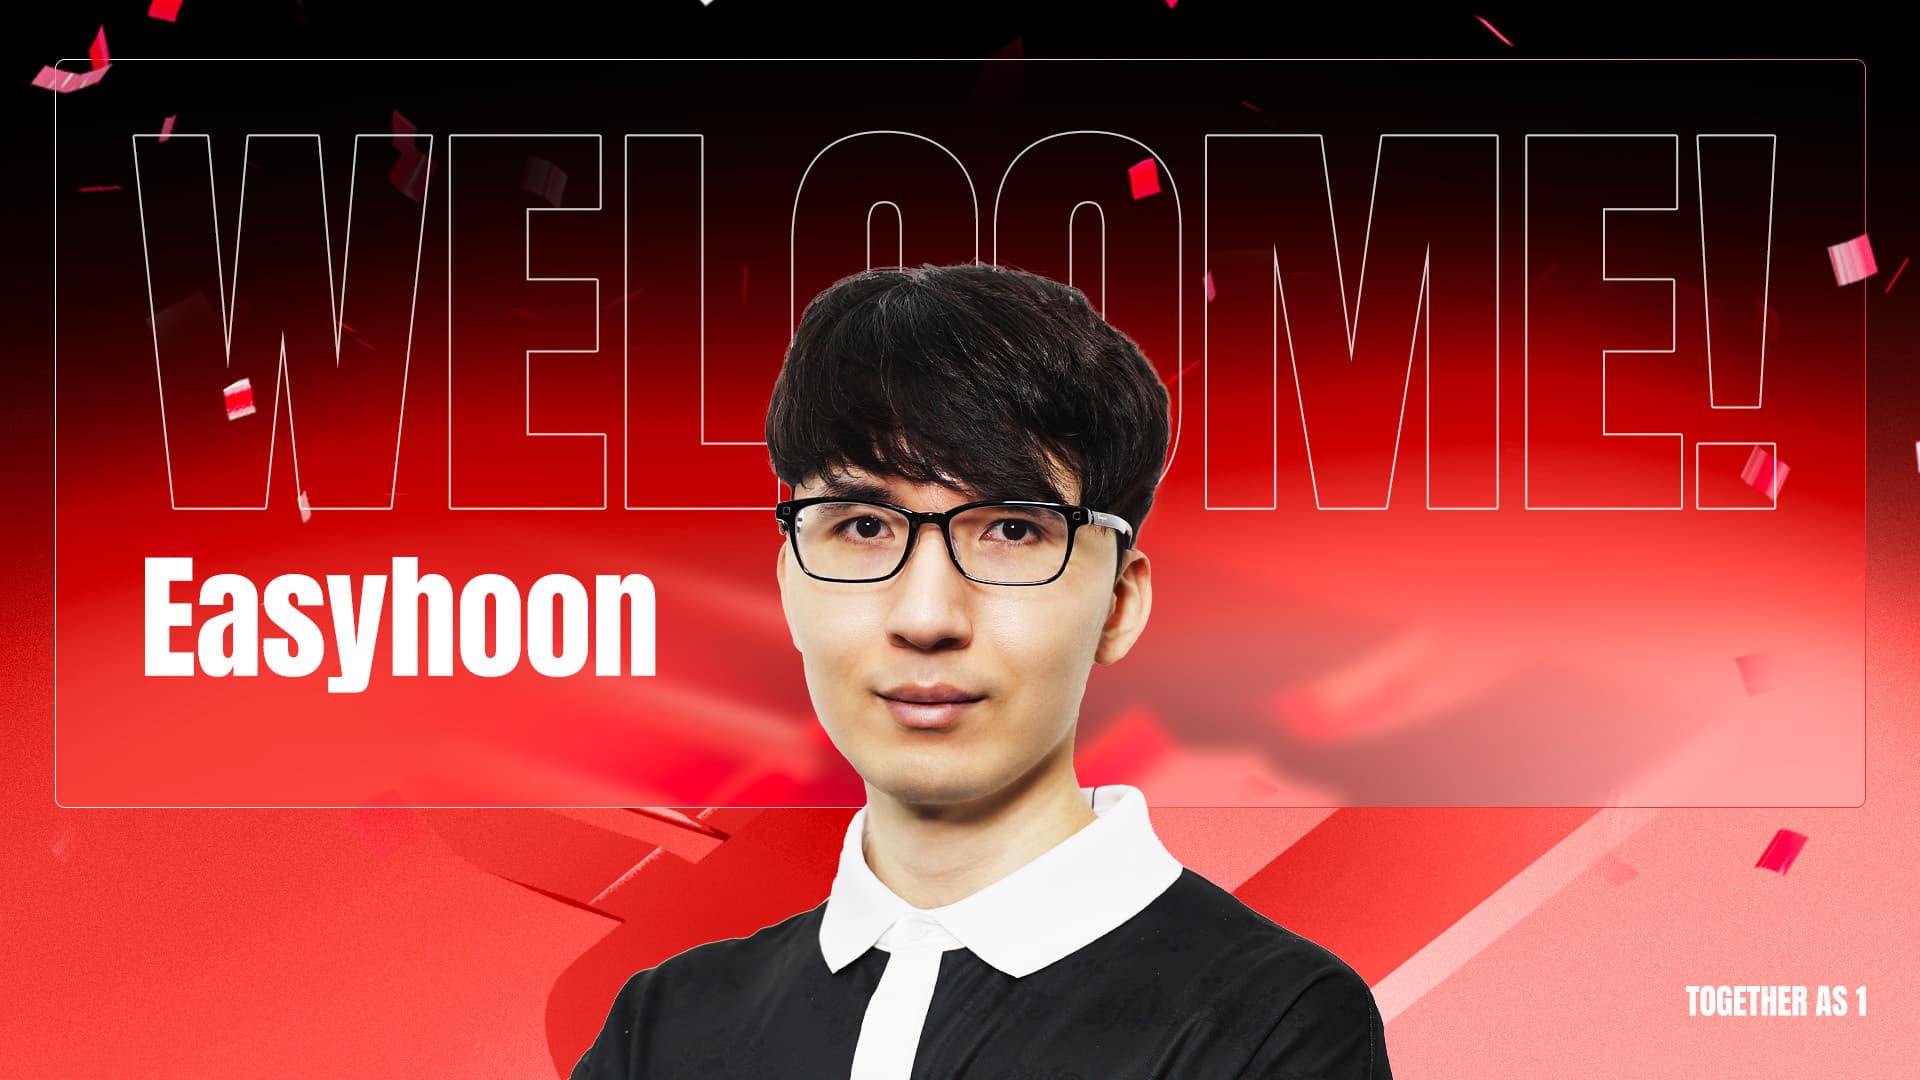 T1 officially announces S5 champion mid laner Easyhoon's return to T1 as a content creator and streamer.